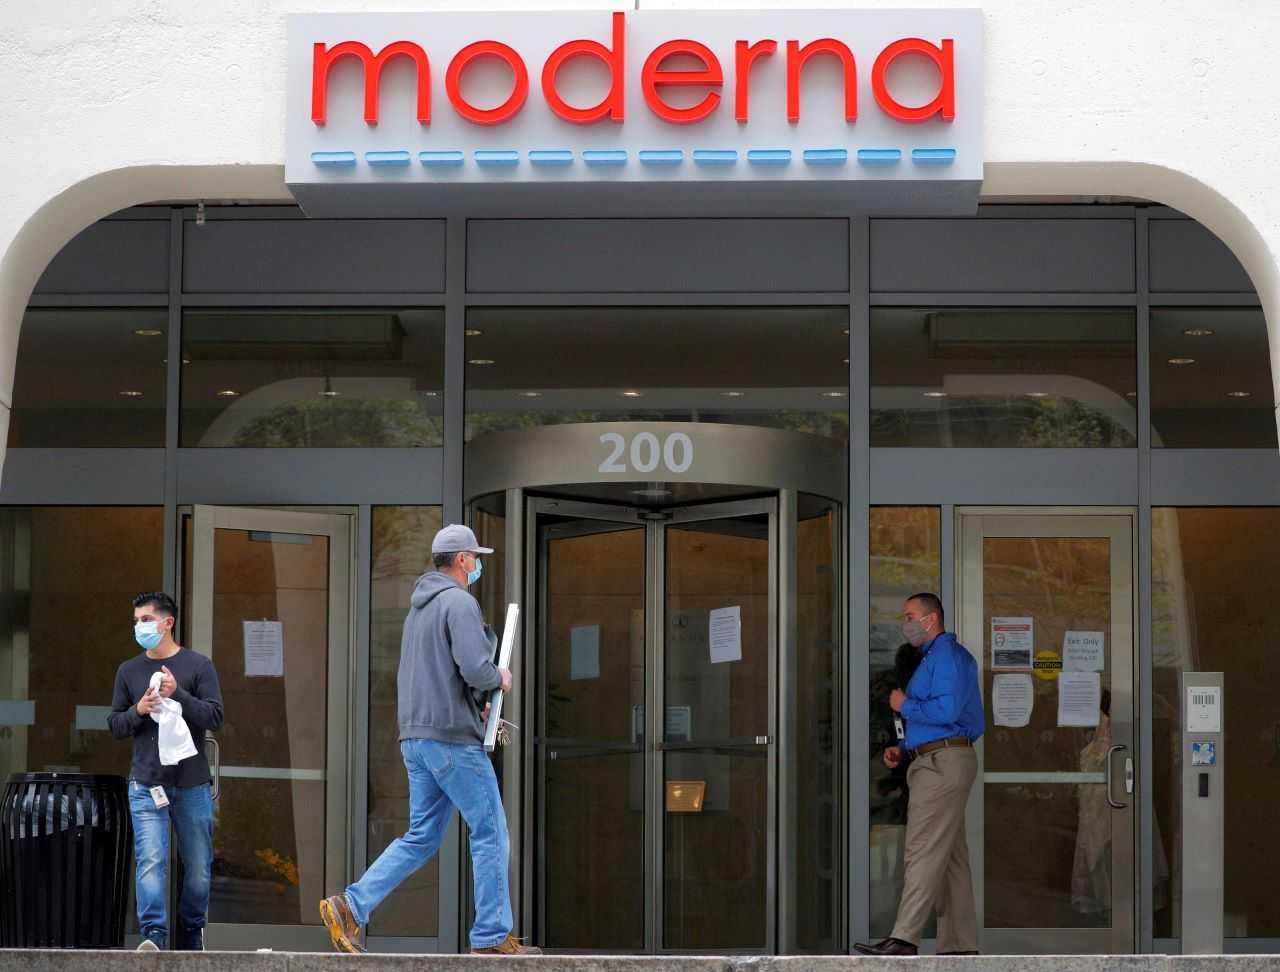 A sign marks the headquarters of Moderna Therapeutics, which is developing a vaccine against Covid-19, in Cambridge, Massachusetts, US, May 18, 2020. Photo: Reuters